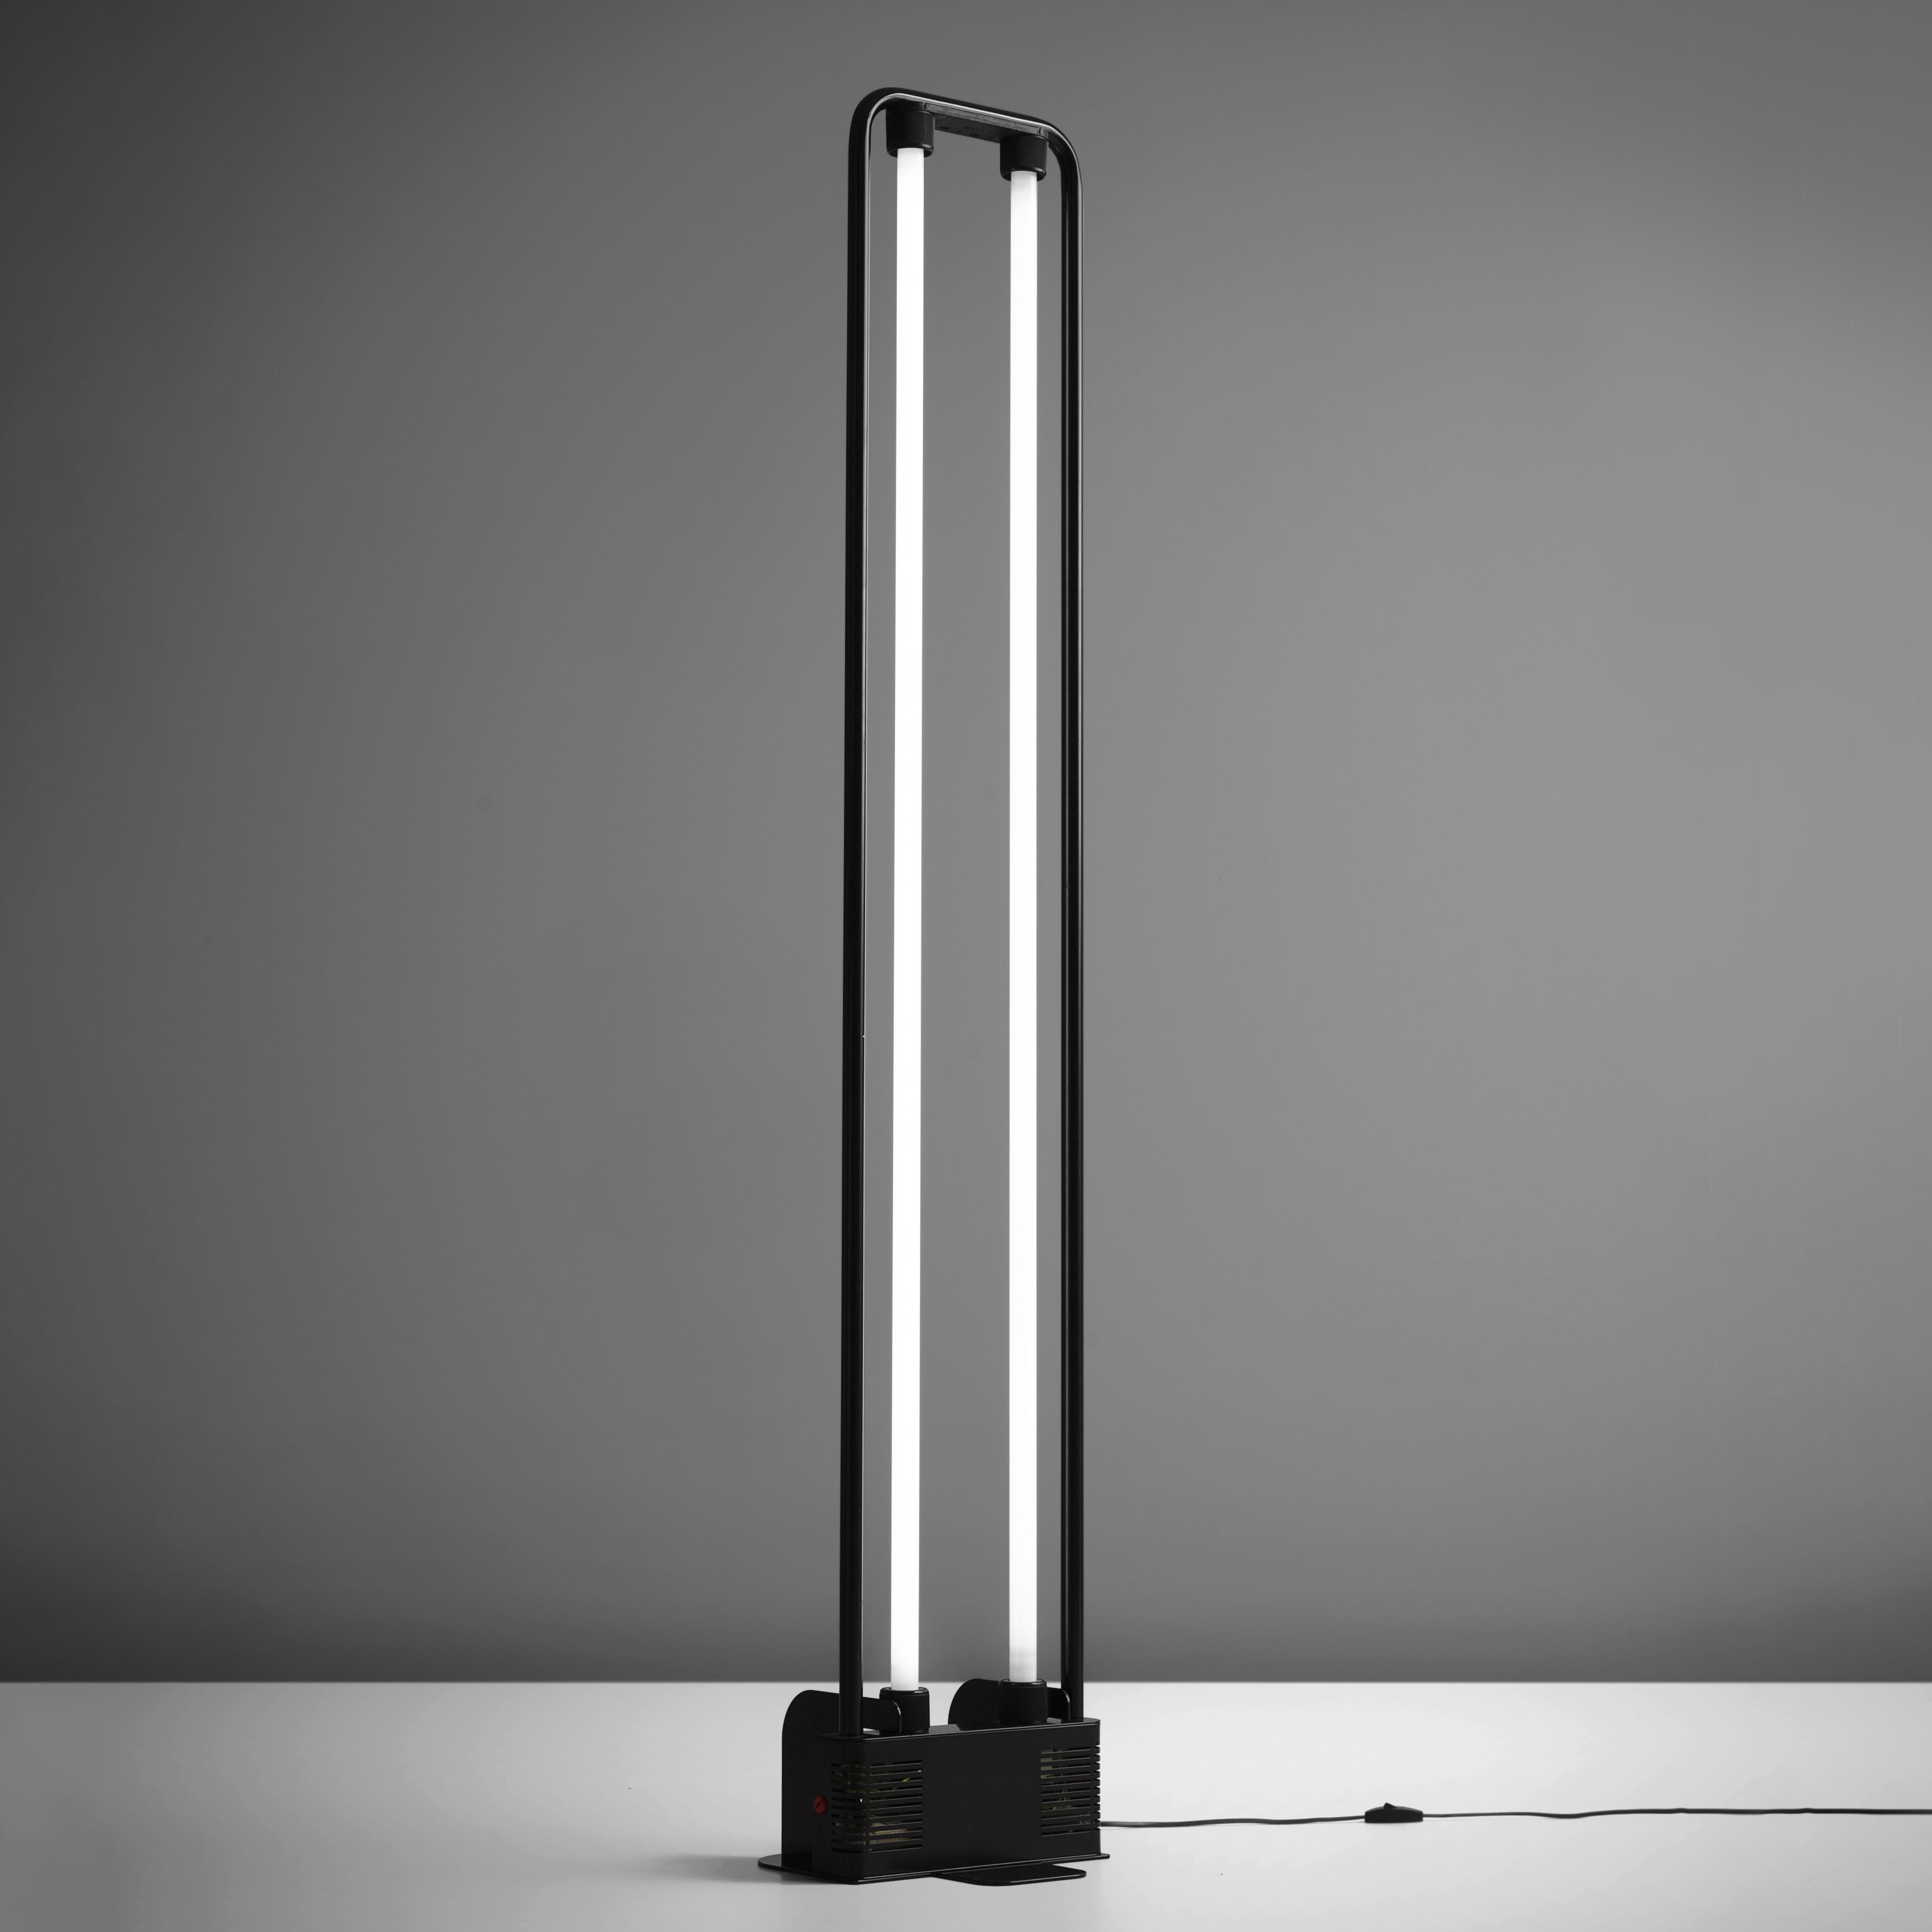 Gian Nicola Gigante for Zerbetto, floor lamp, black coated metal, glass, Italy, 1980s. 

This Postmodern floor lamp is designed by Italian designer Gian Nicola Gigante. Gigante is known for his fluorescent floor lamps. This light is simplistic and